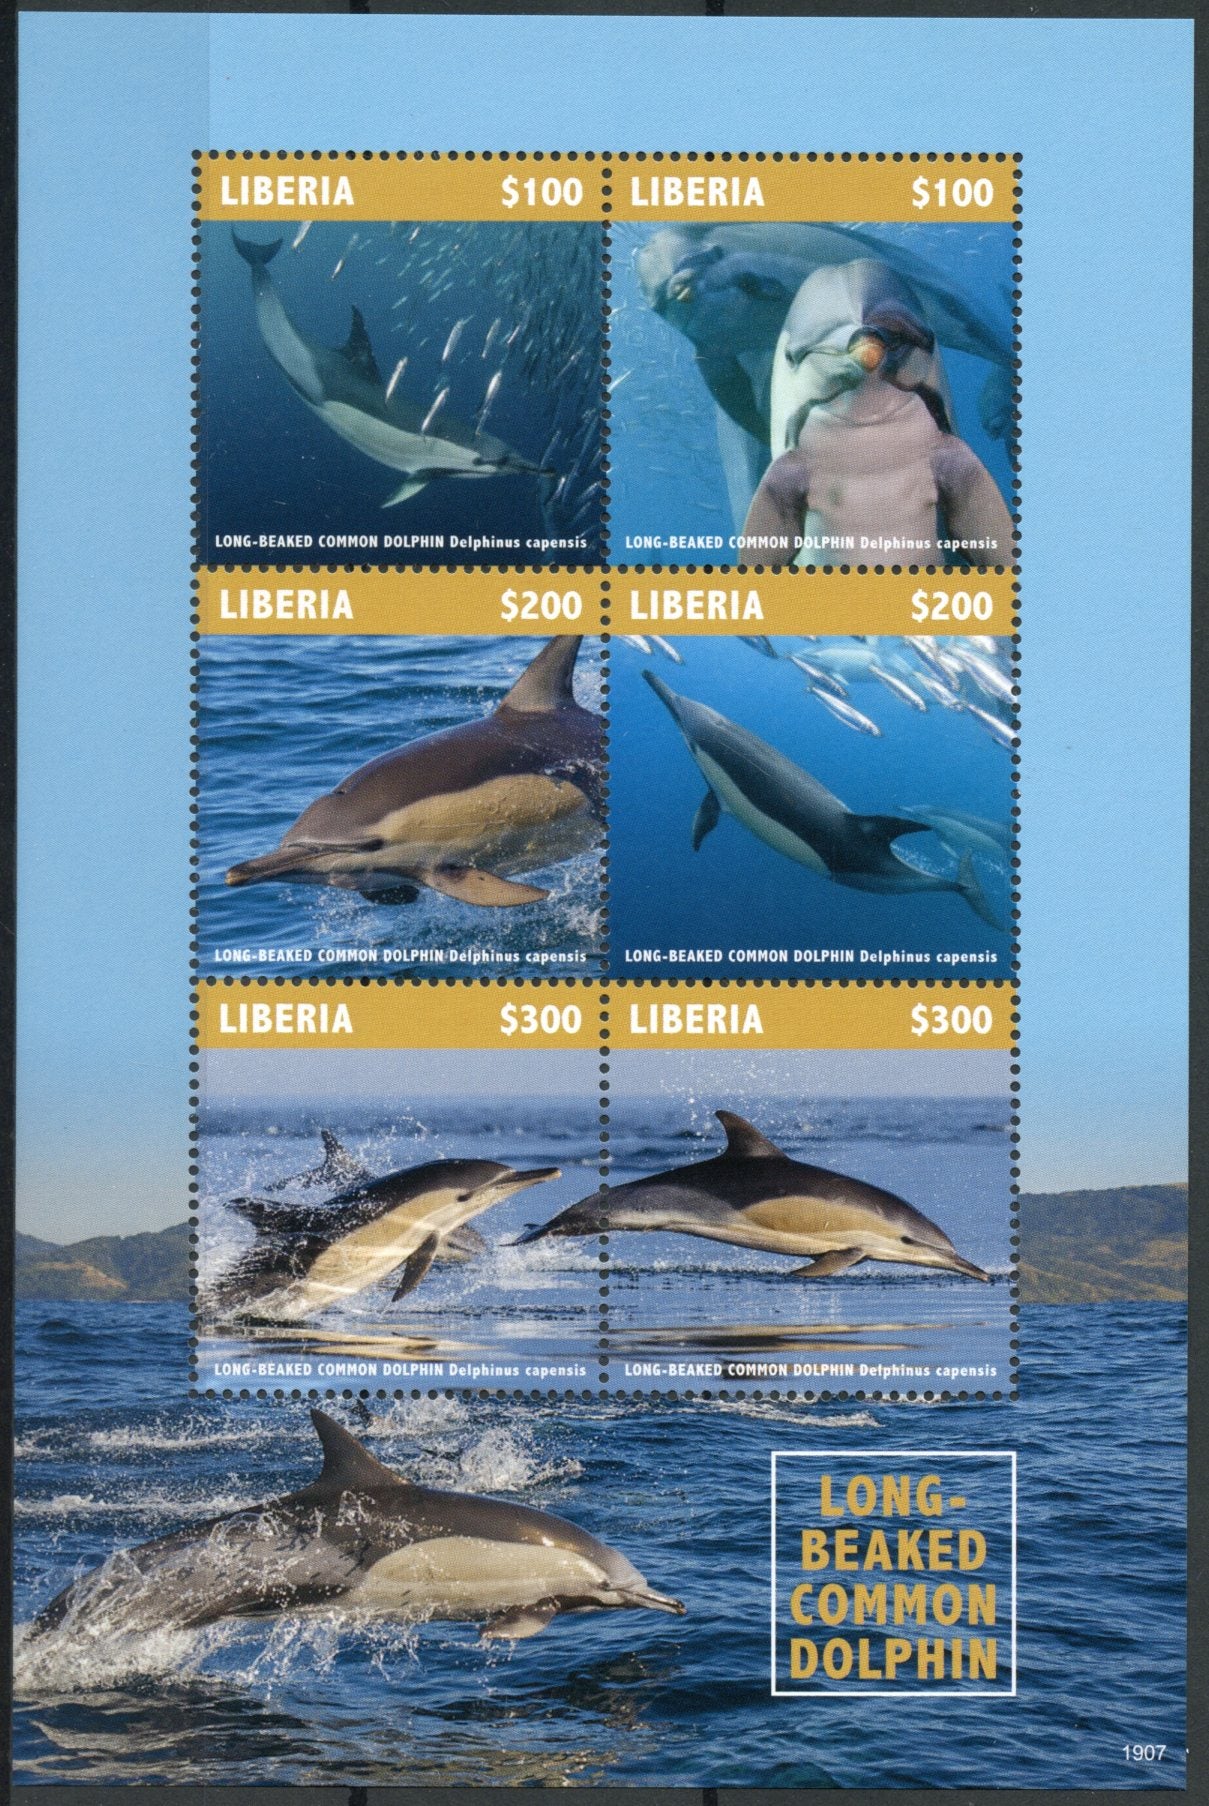 Liberia 2019 MNH Long-Beaked Dolphin 6v M/S Dolphins Marine Animals Stamps